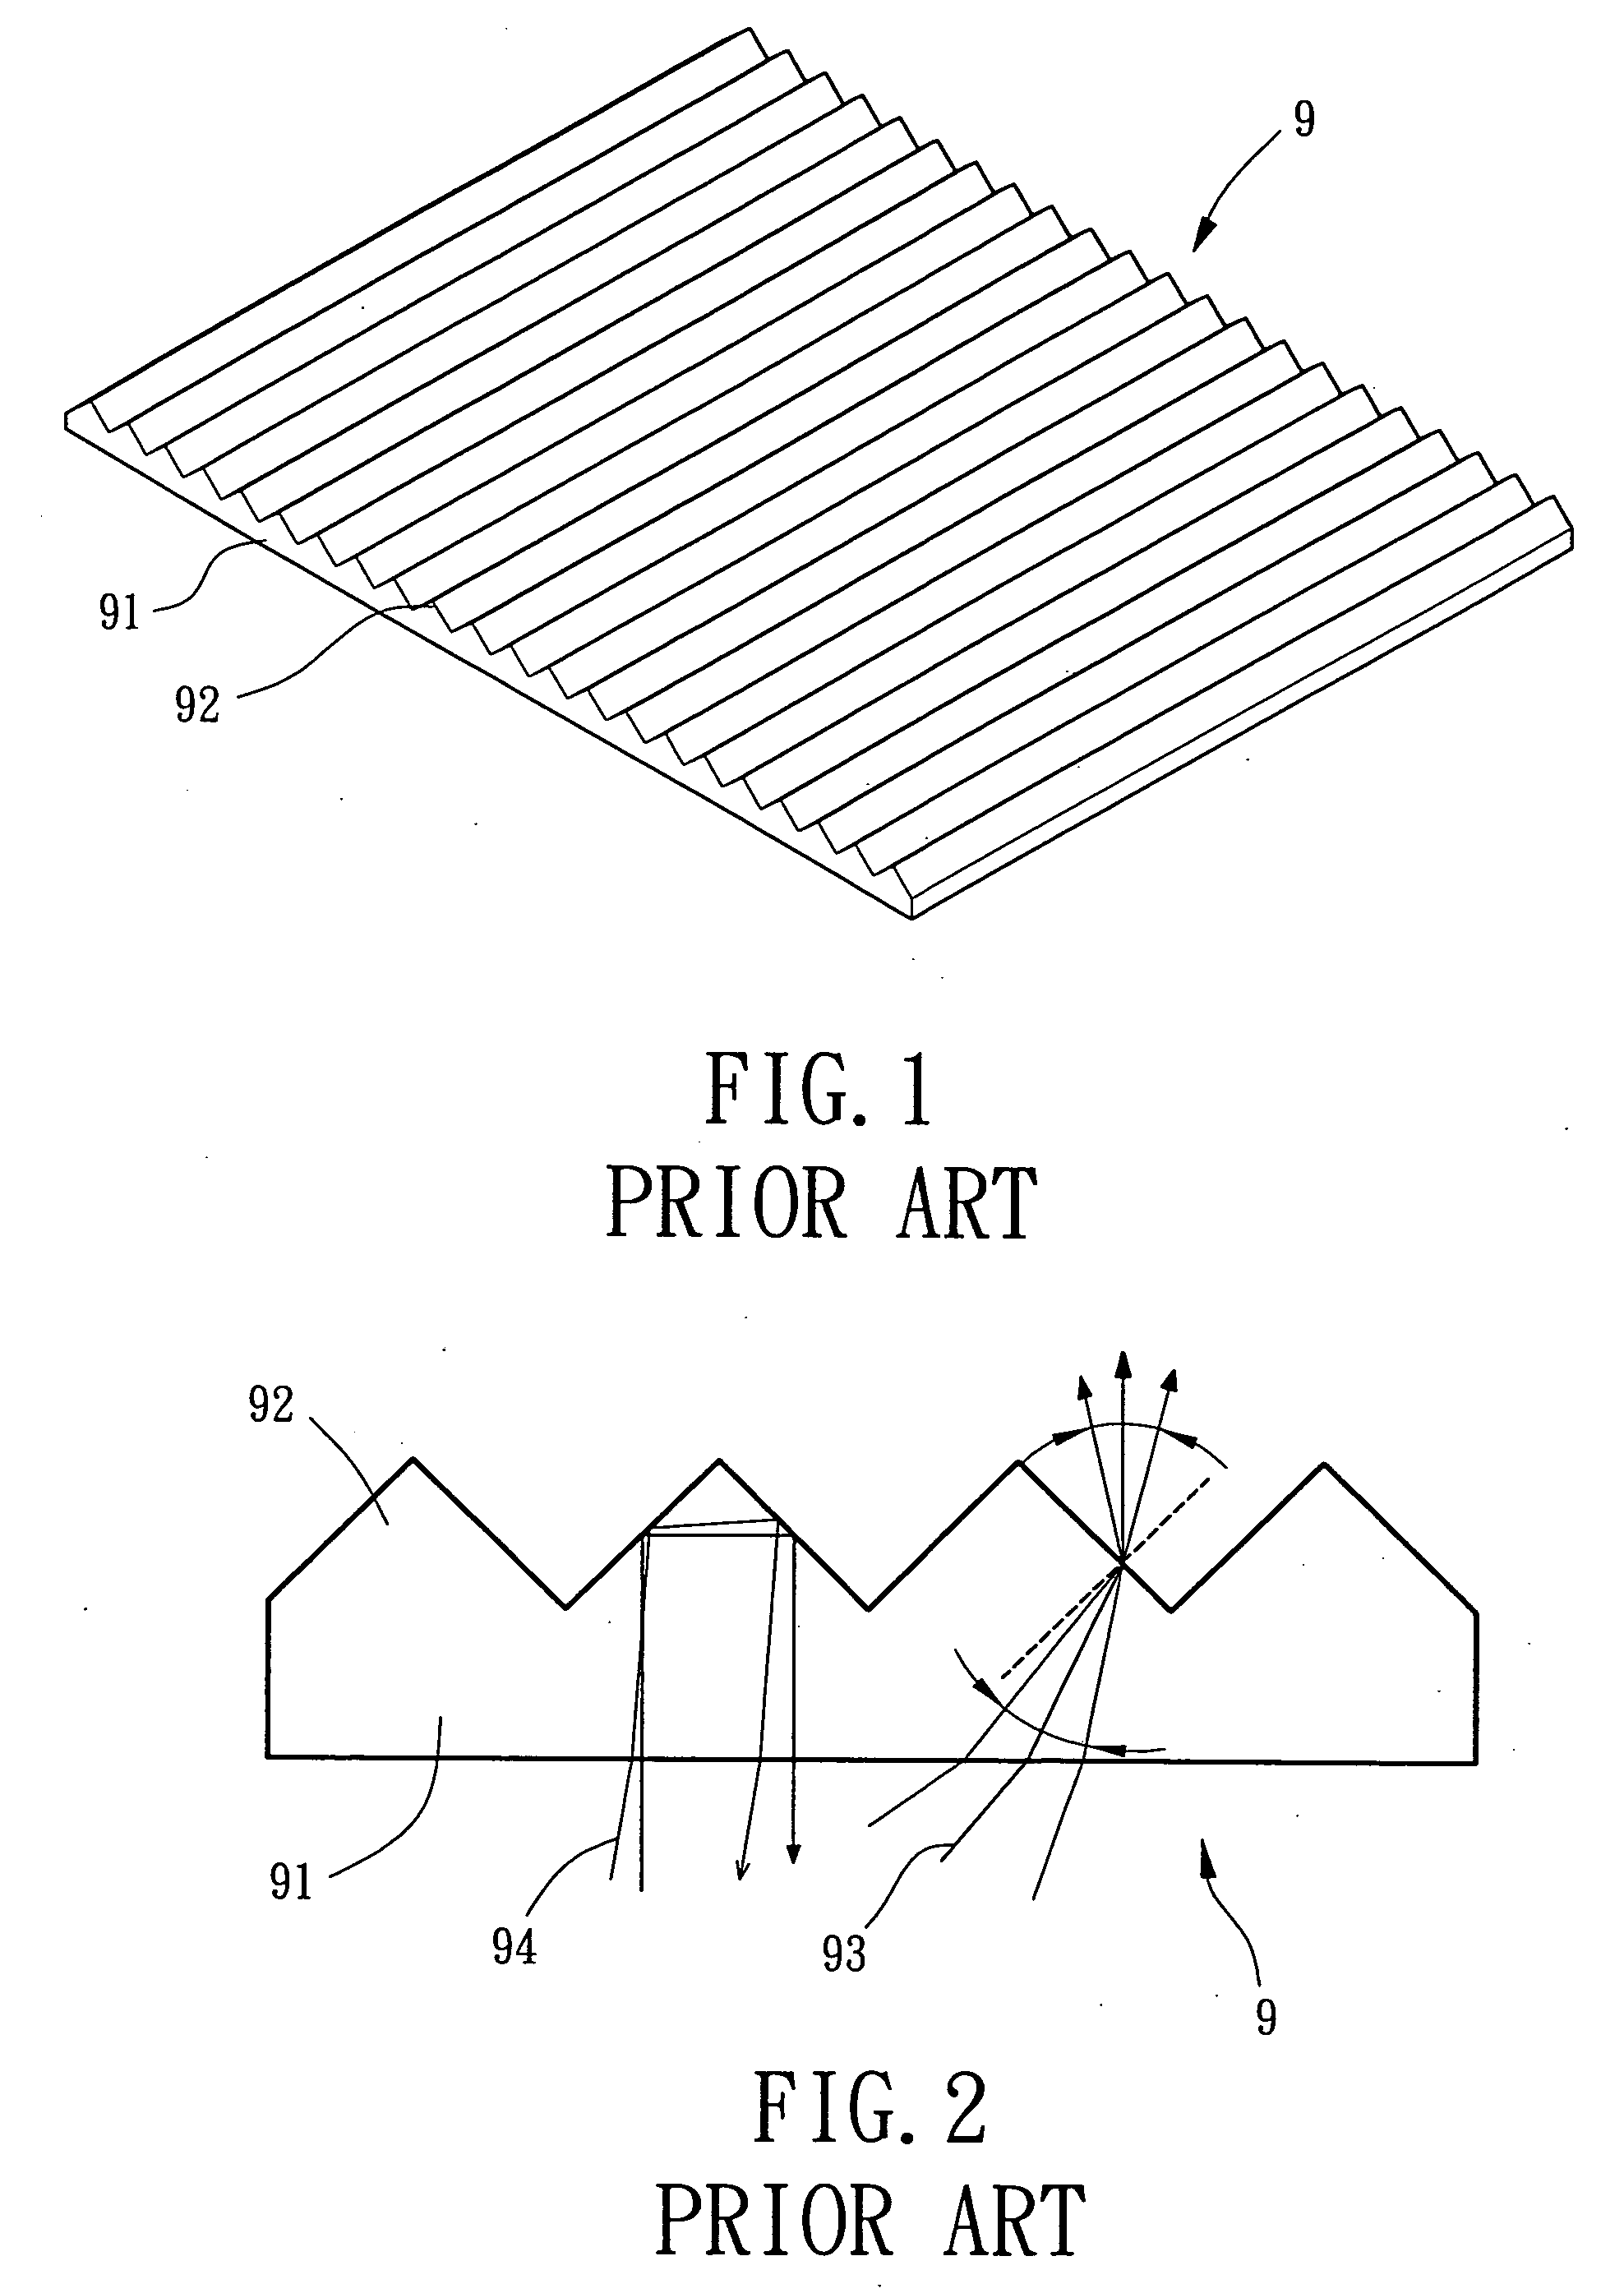 Brightness enhancement film having curved prism units and light scattering particles